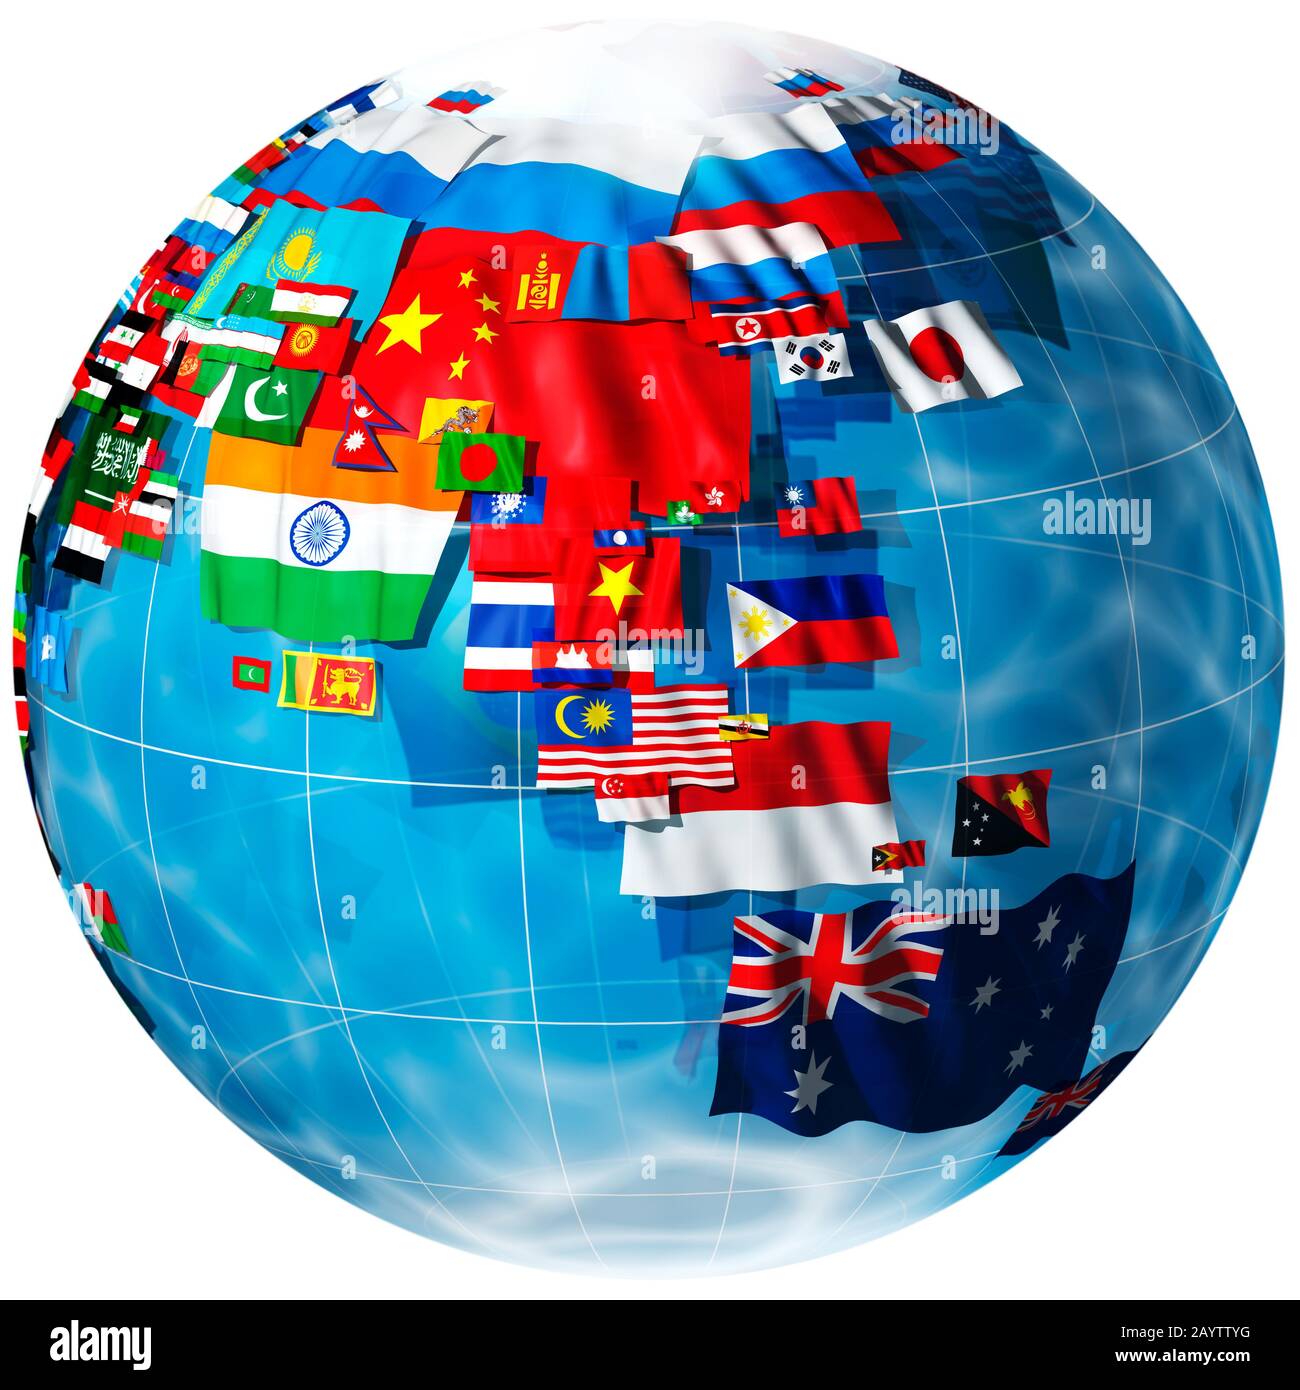 Flags of the world in the shape of a globe. Asia and Australasia viewpoint.  White background. Stock Photo